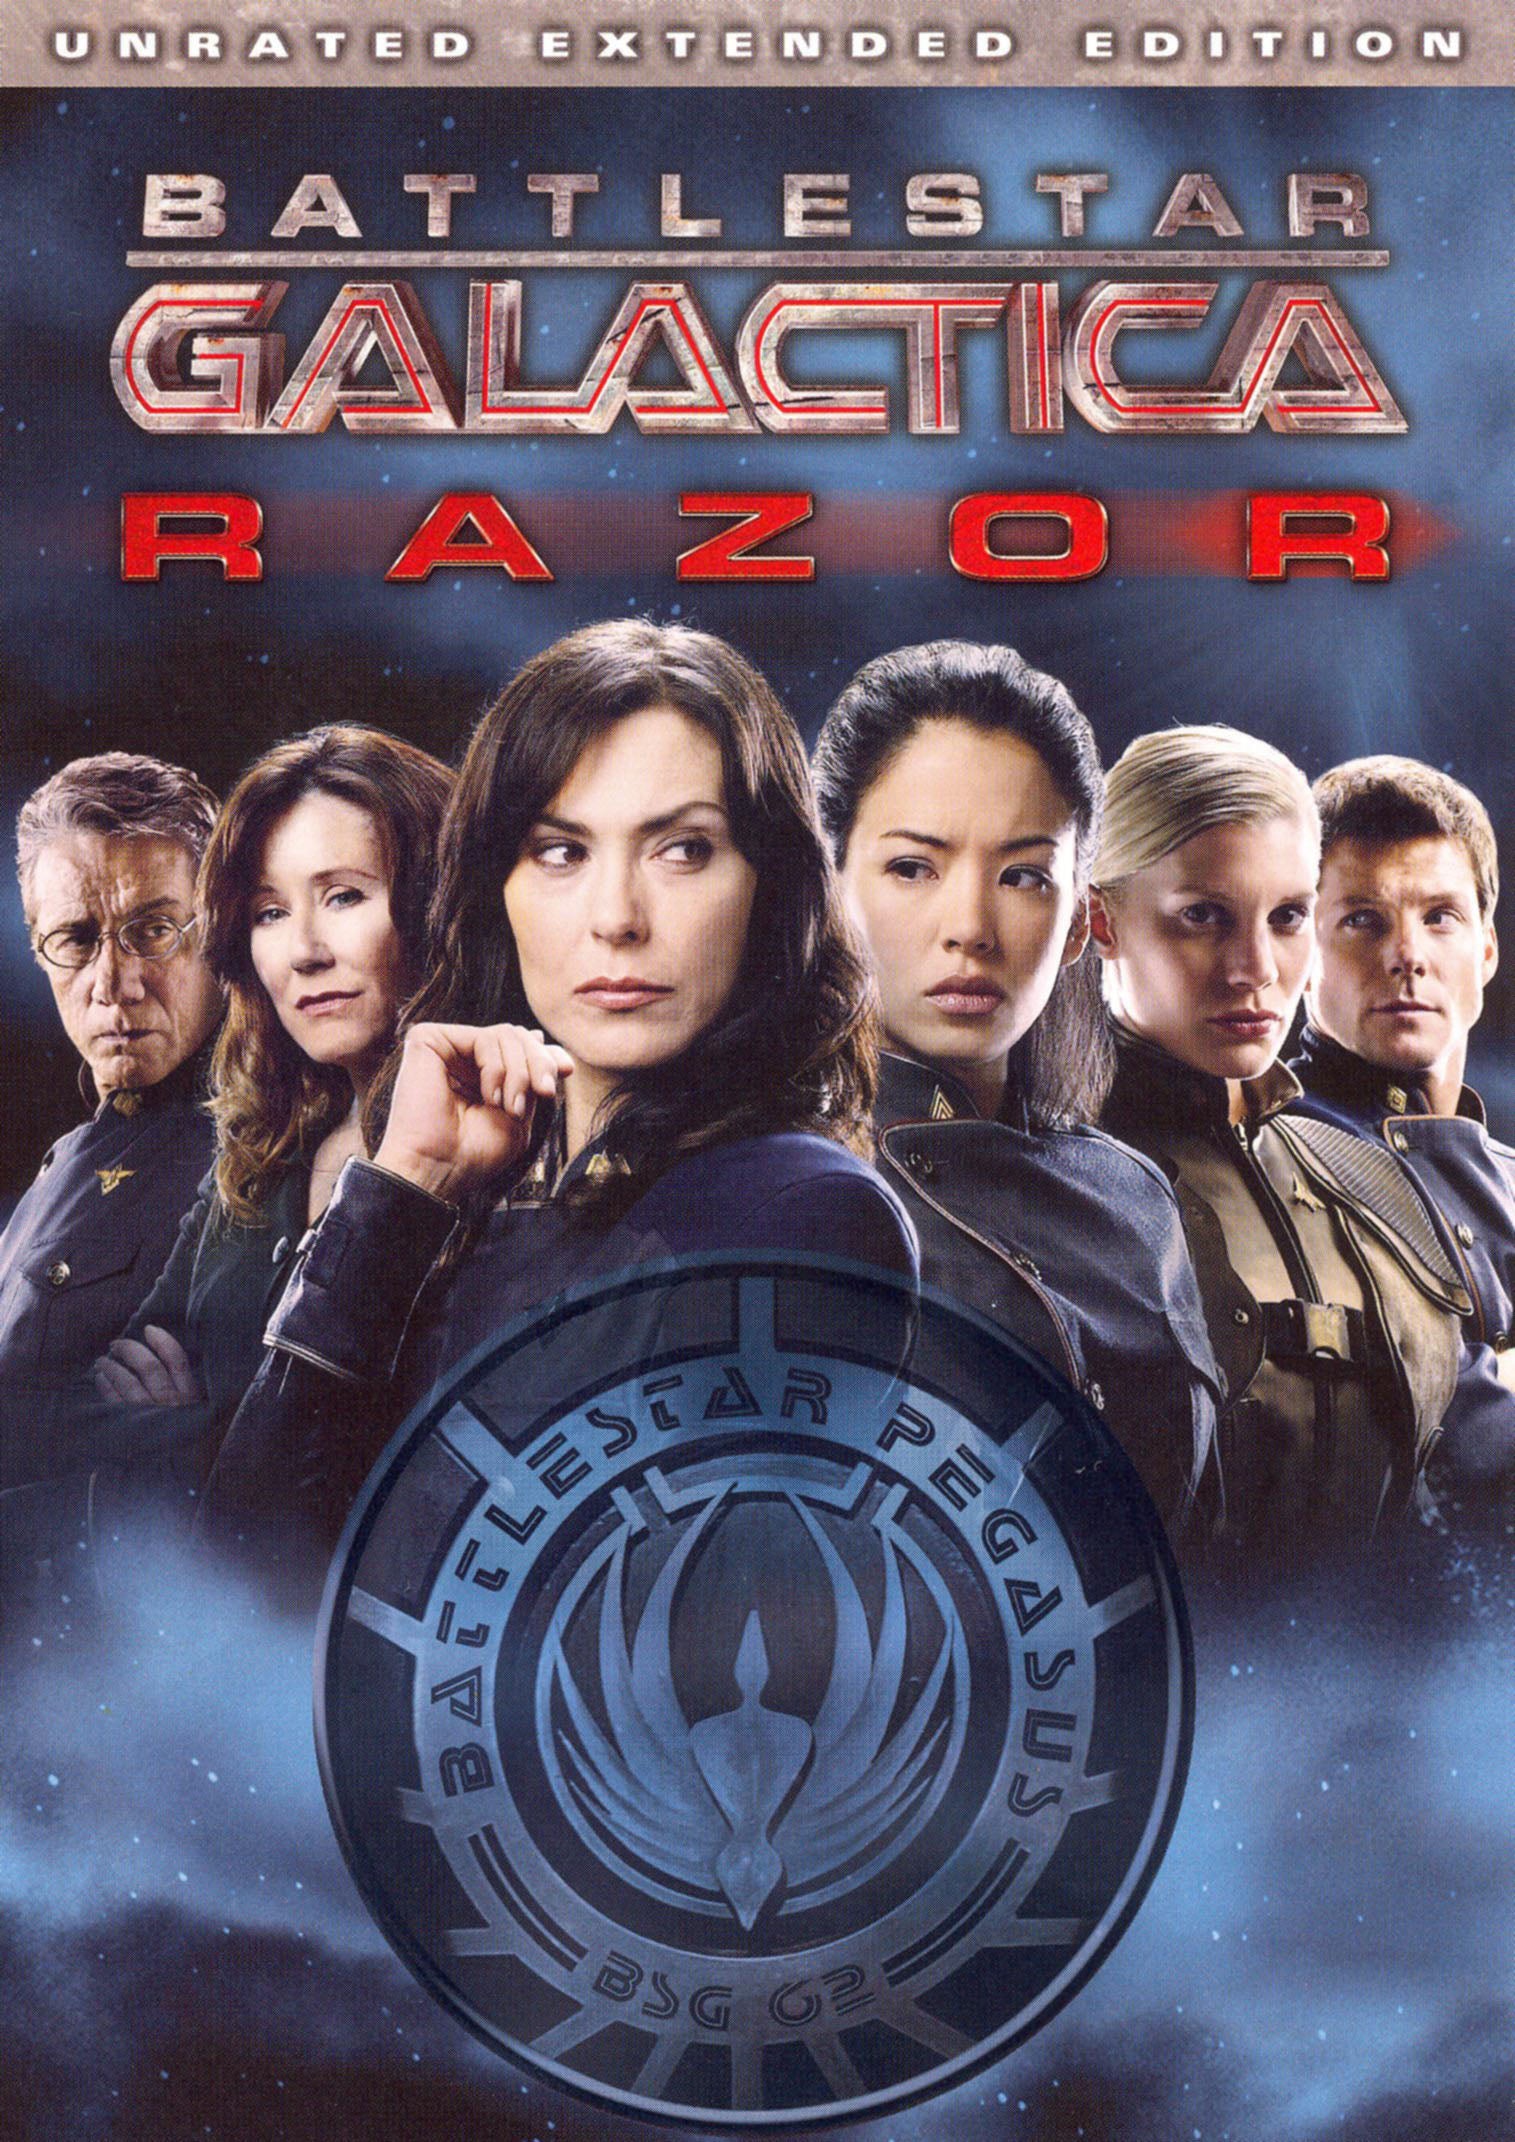 Battlestar Galactica: Razor [Unrated Extended Edition] cover art